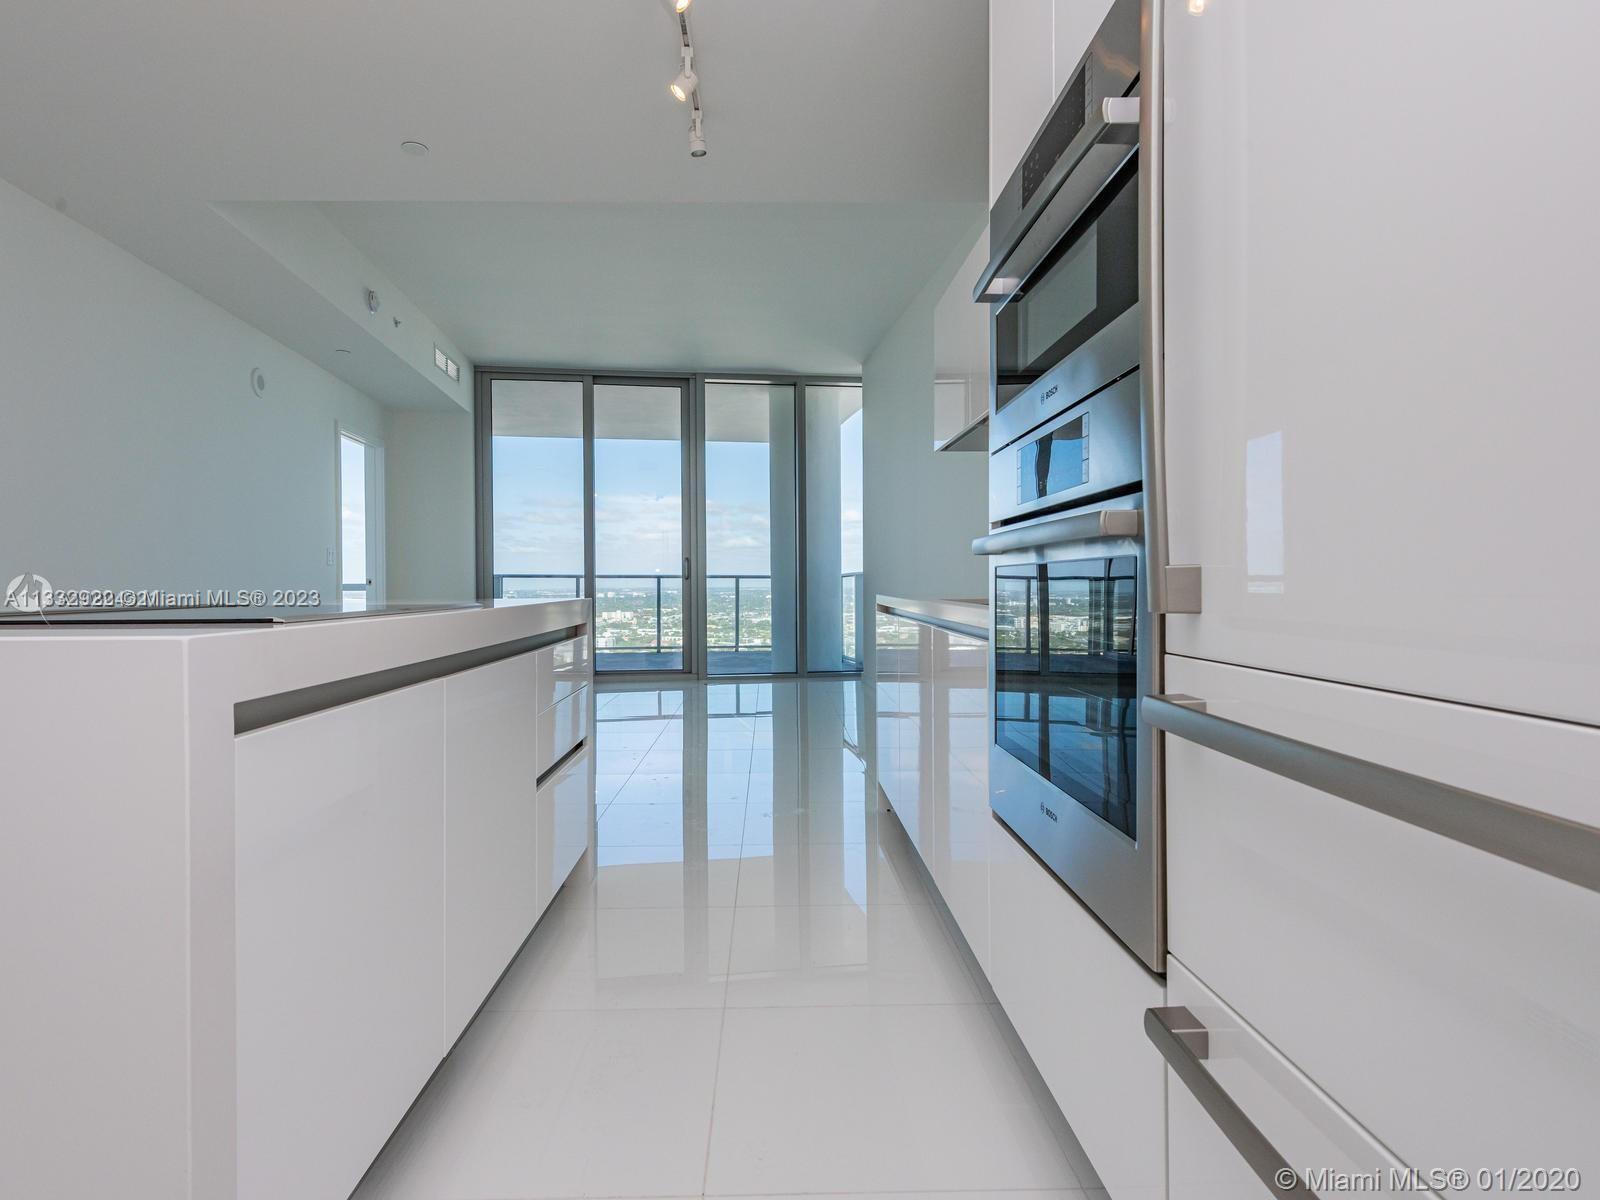 Welcome to Paramount Miami World Center - Large 1 Bed/2 full bath +Den with all white kitchen in the